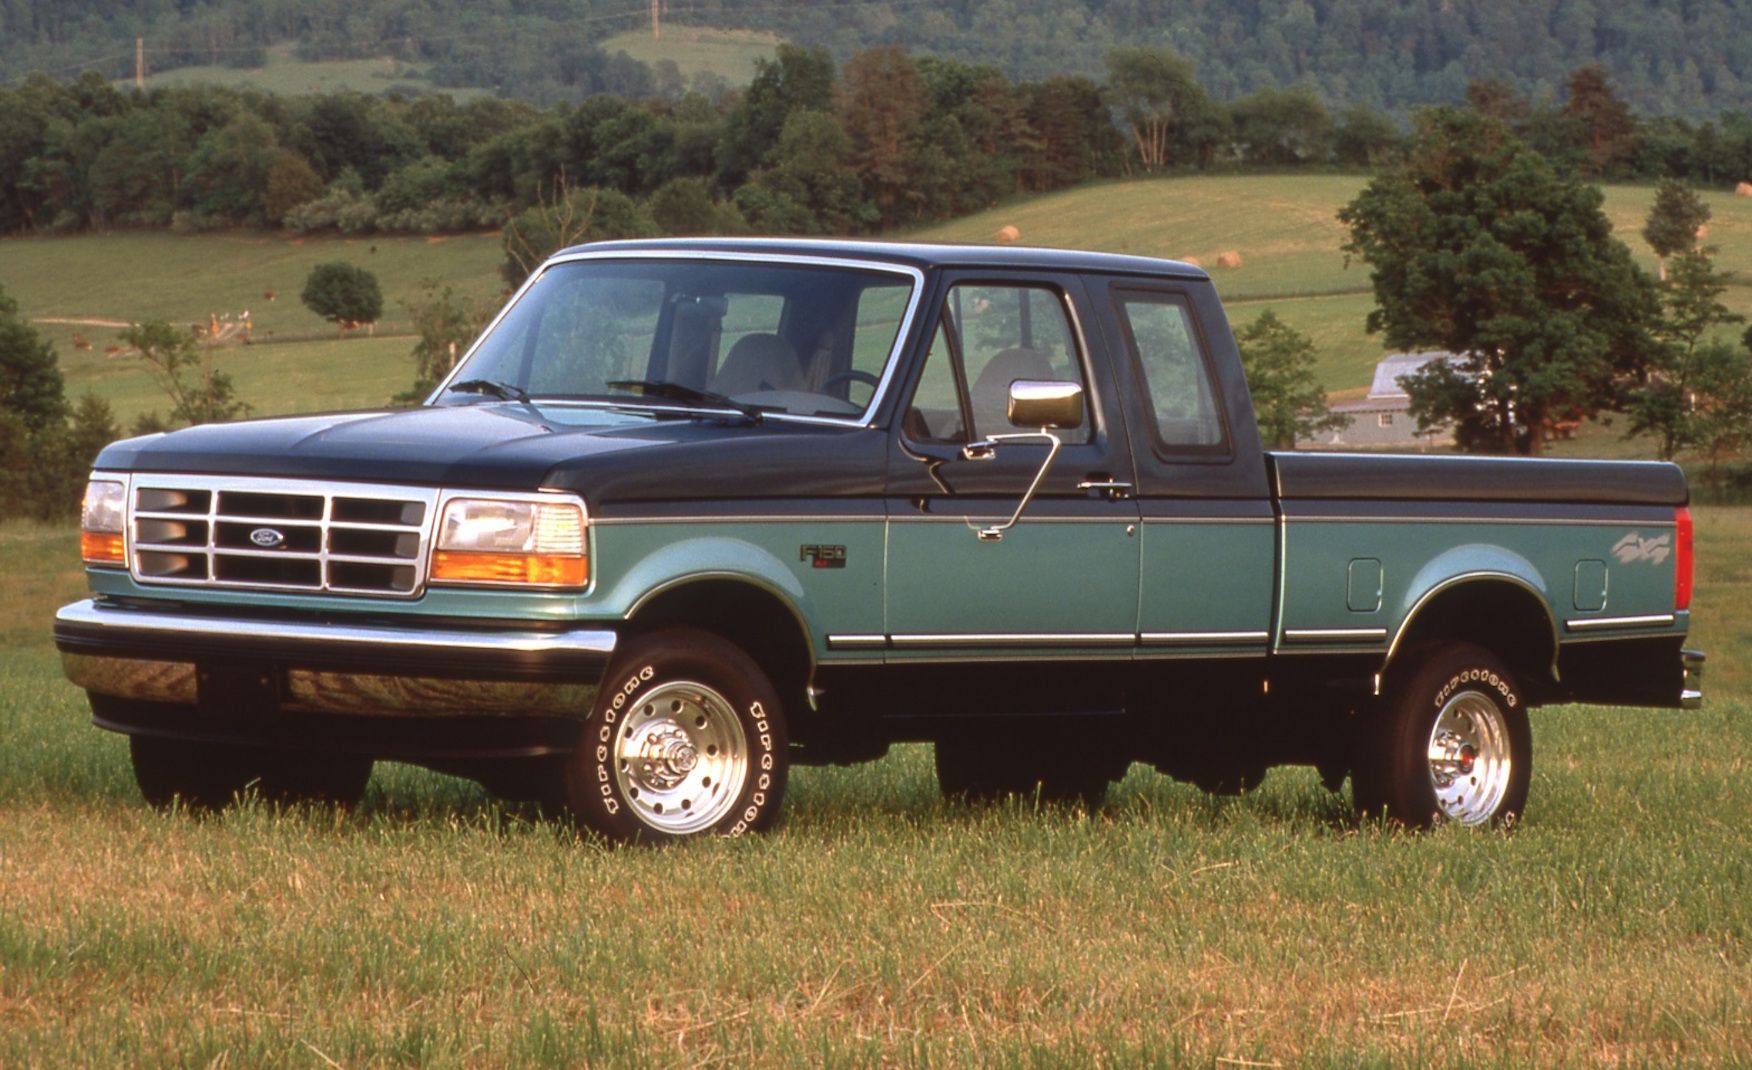 Ford S F Series Pickup Truck History From The Model Tt To Today